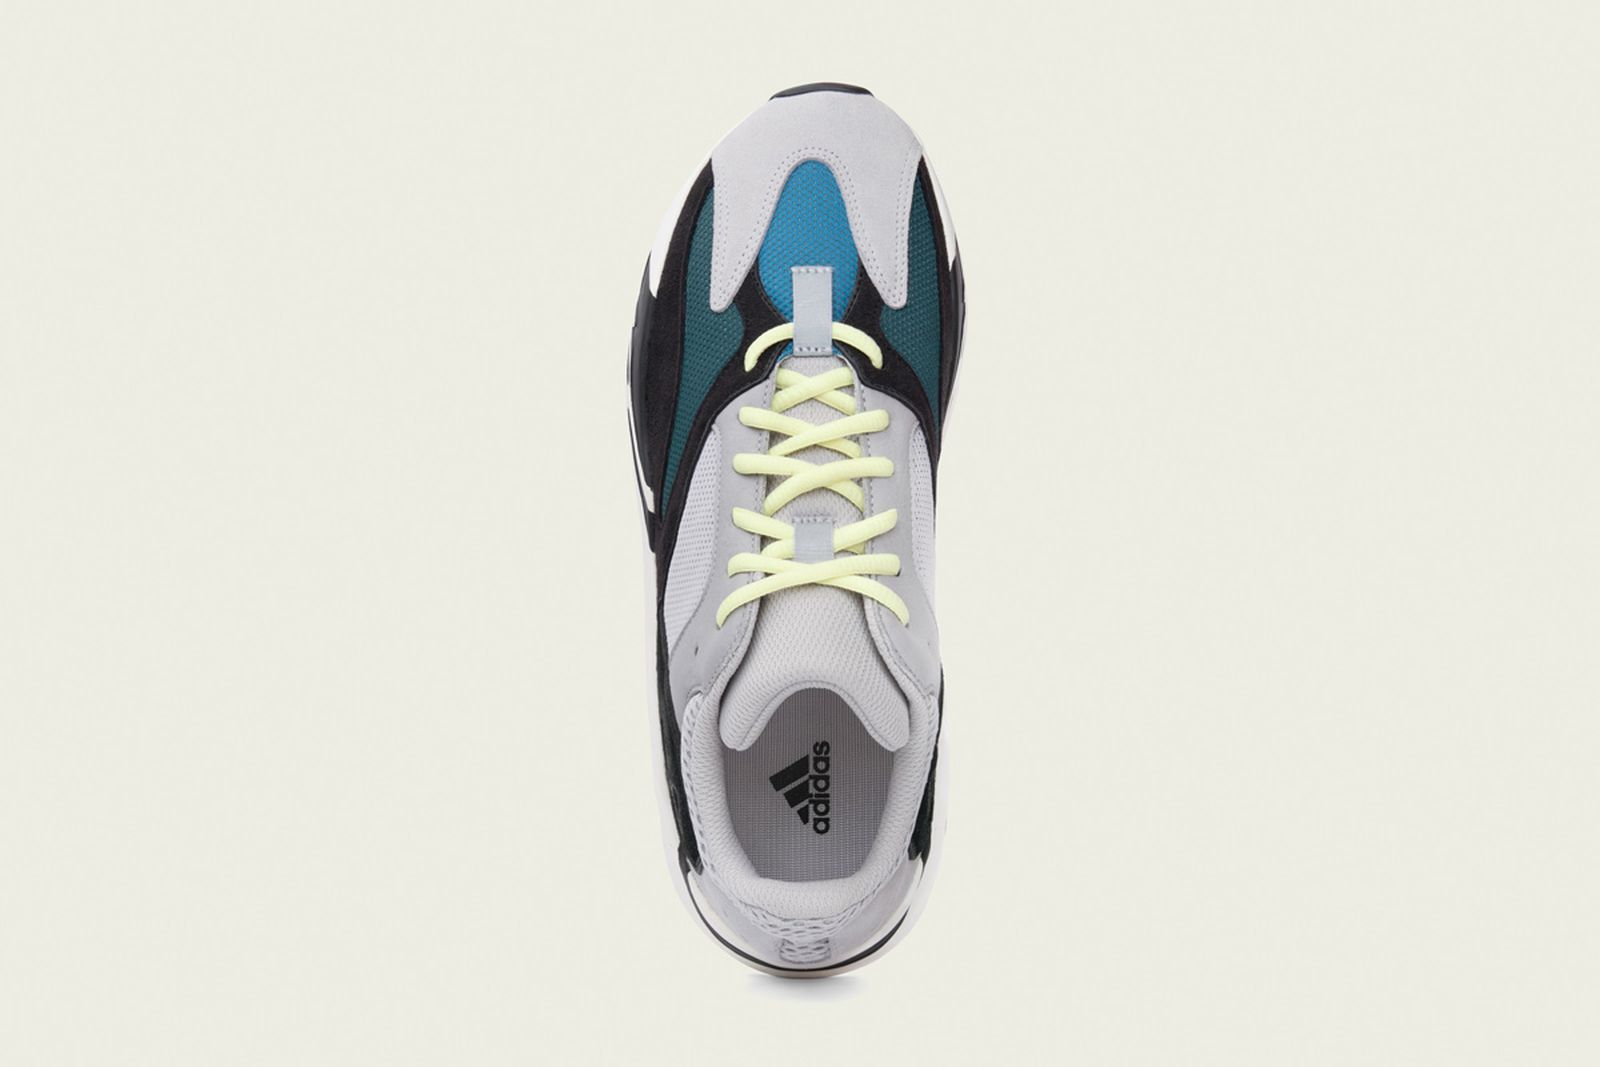 yeezy boost 700 multi release date price Adidas YEEZY BOOST 700 “Multi” kanye west